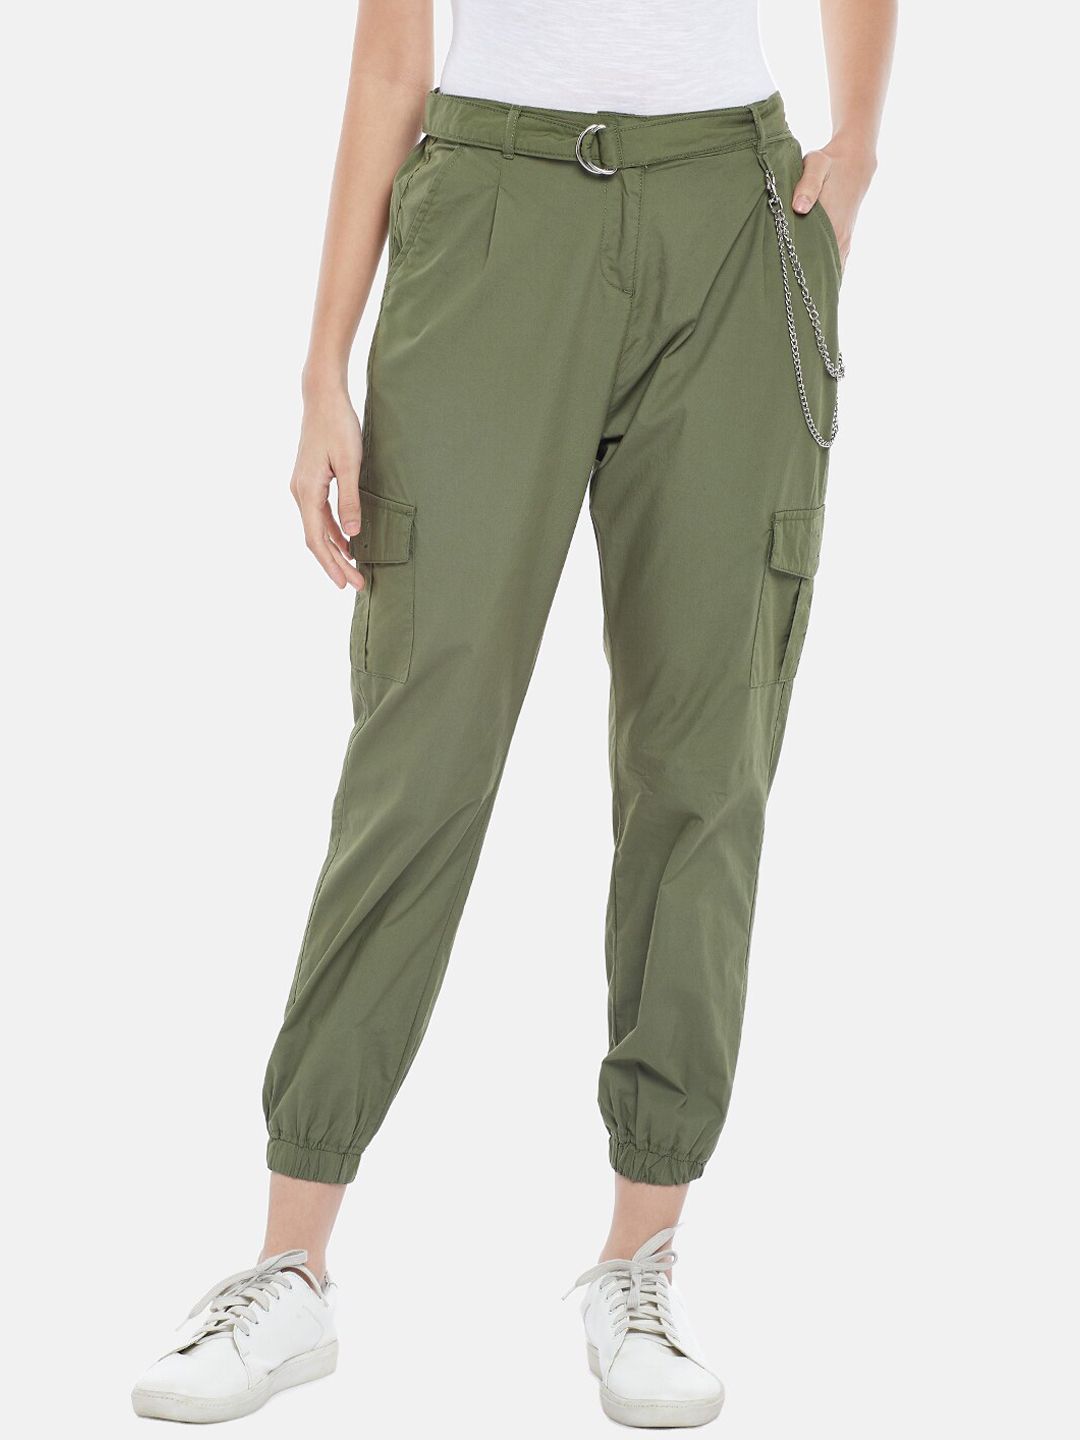 People Women Olive Green Cargos Trousers Price in India